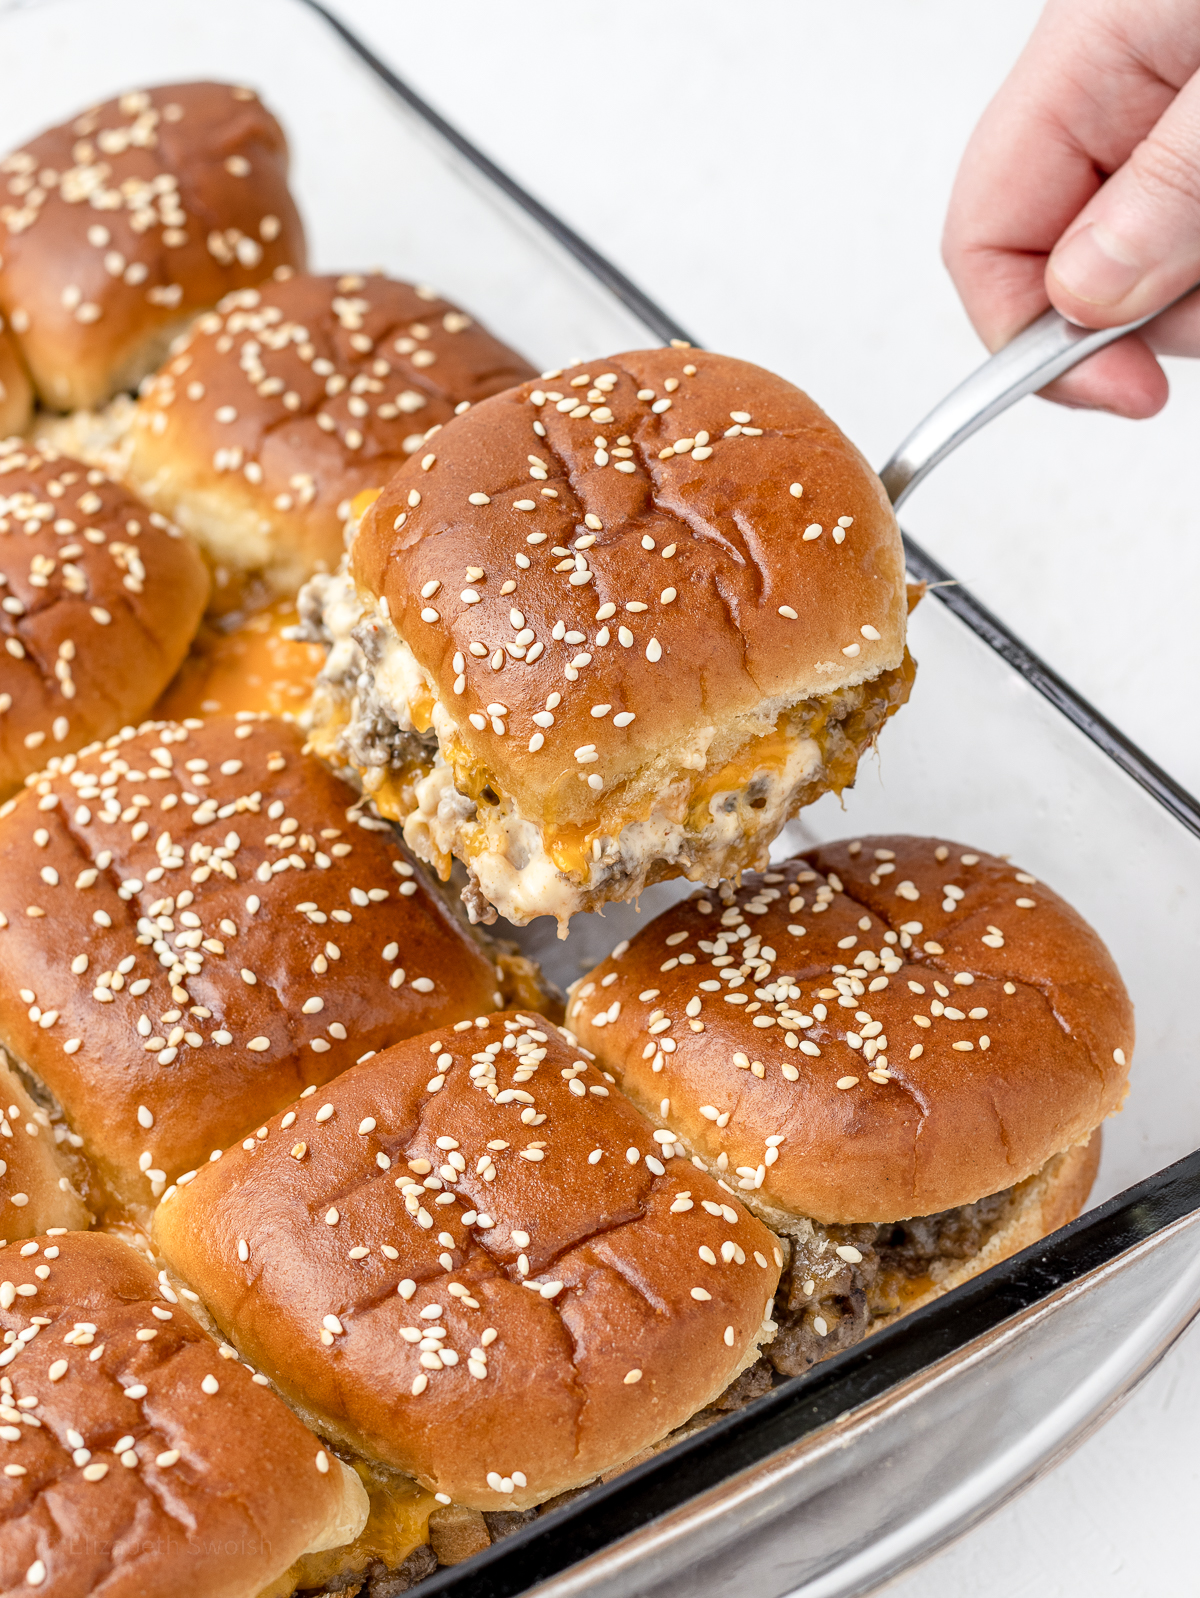 Toasty sliders in a baking pan with a hand lifting one from the pan.